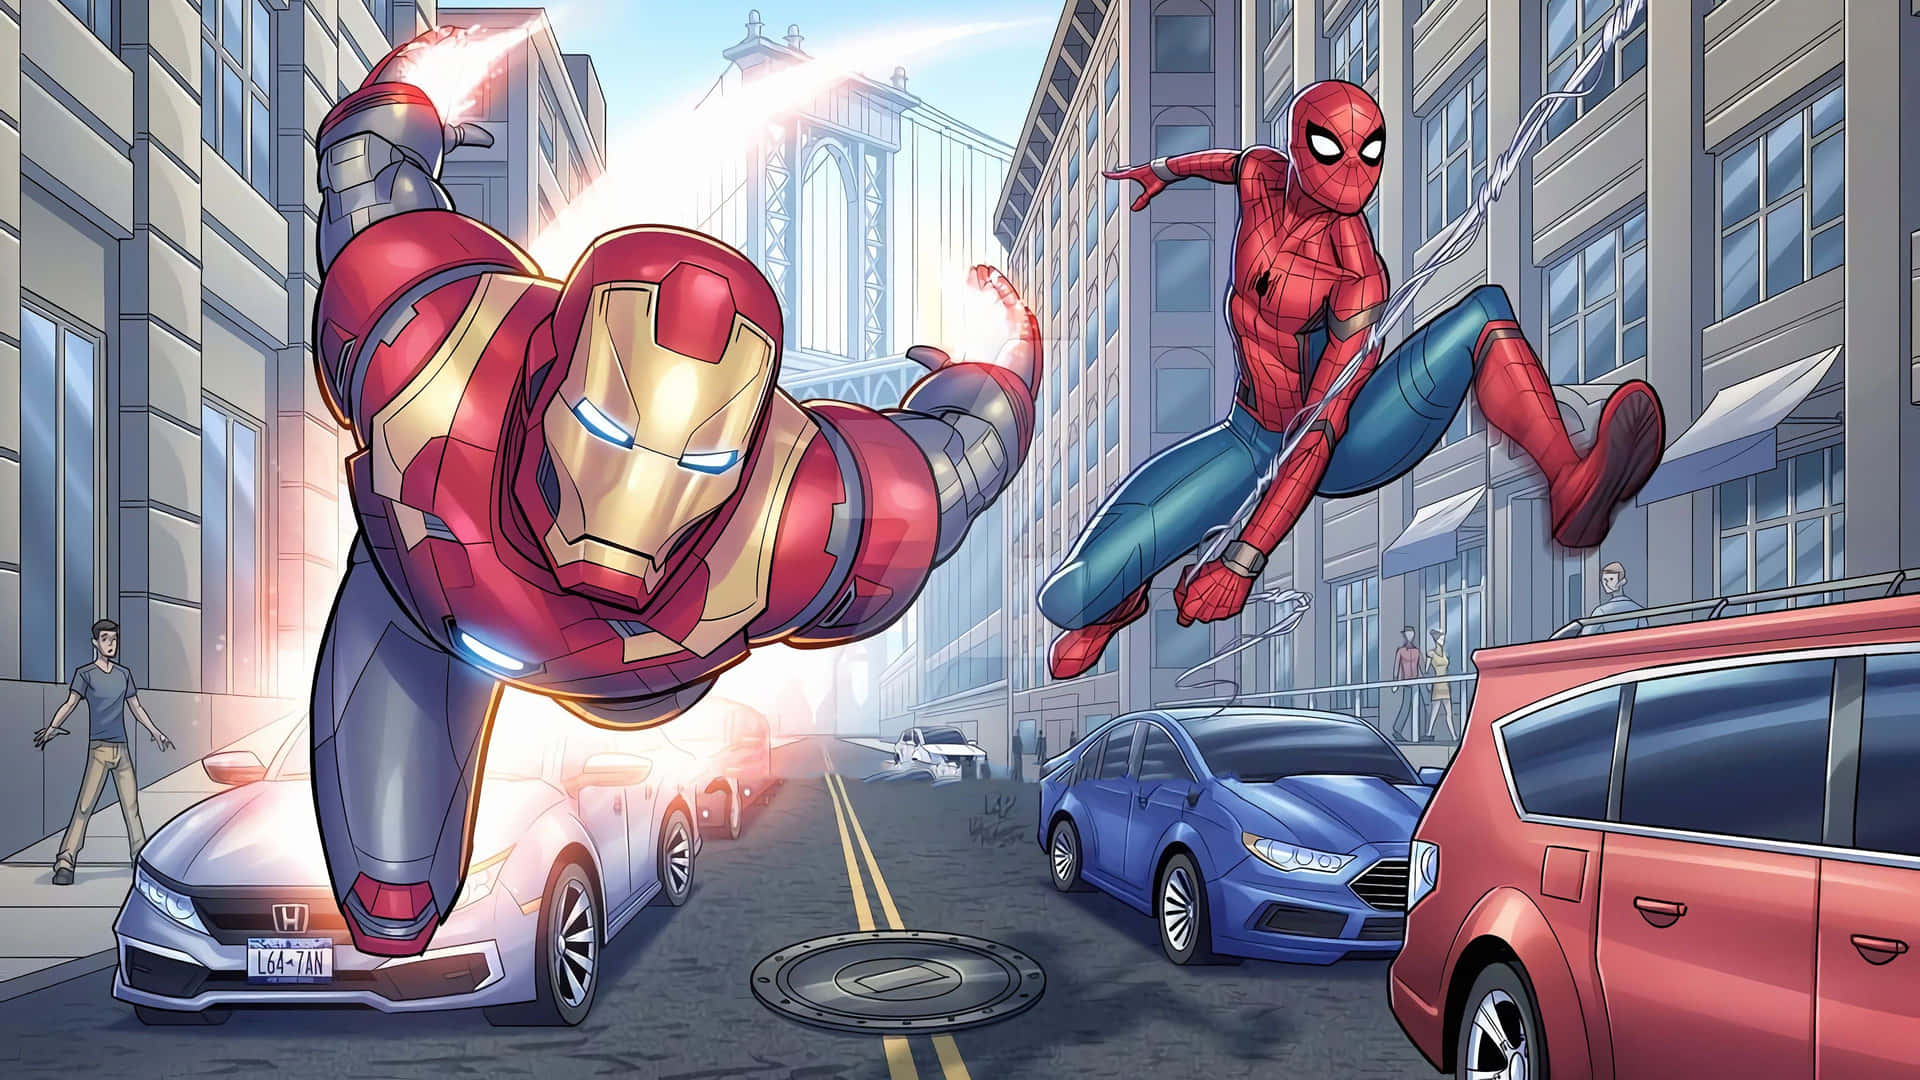 Marvel Comic Superheroes Iron Man and Spider-Man team up! Wallpaper